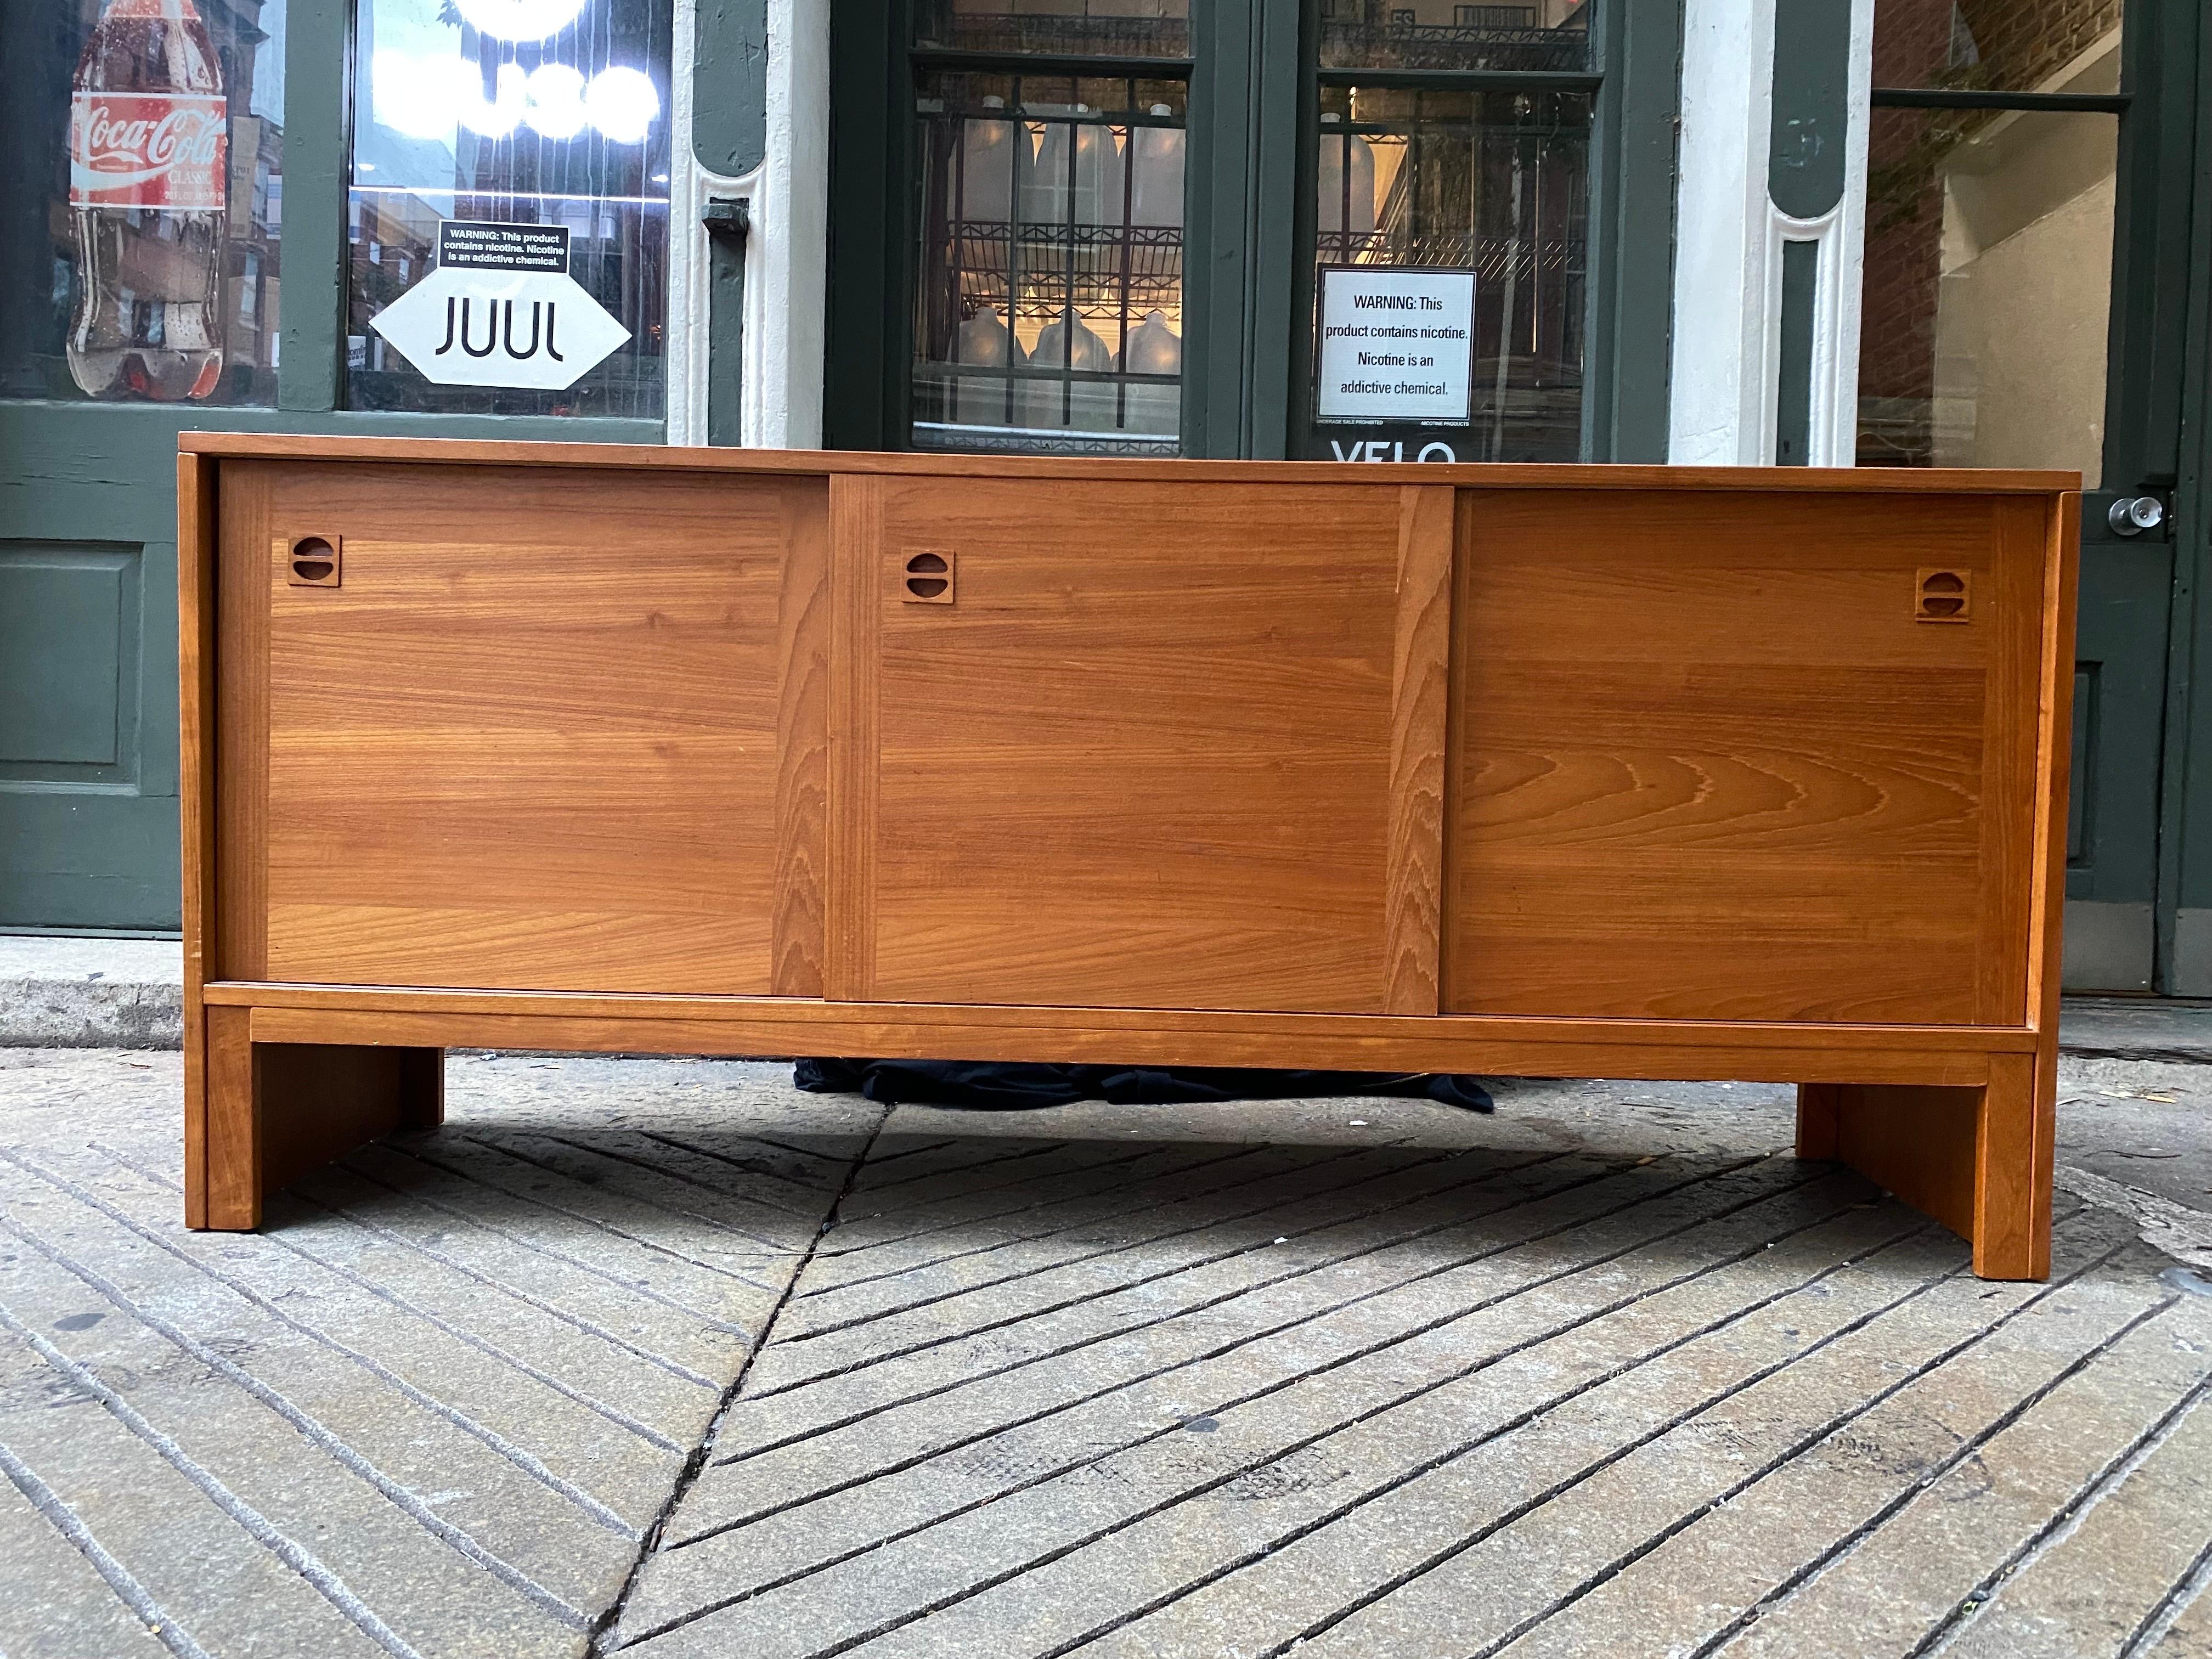 Teak 3 door sliding door Credenza. Doors slide to reveal an adjustable shelf. Each end has one shallow pull out drawer. In nice original condition! Ready to go as is!